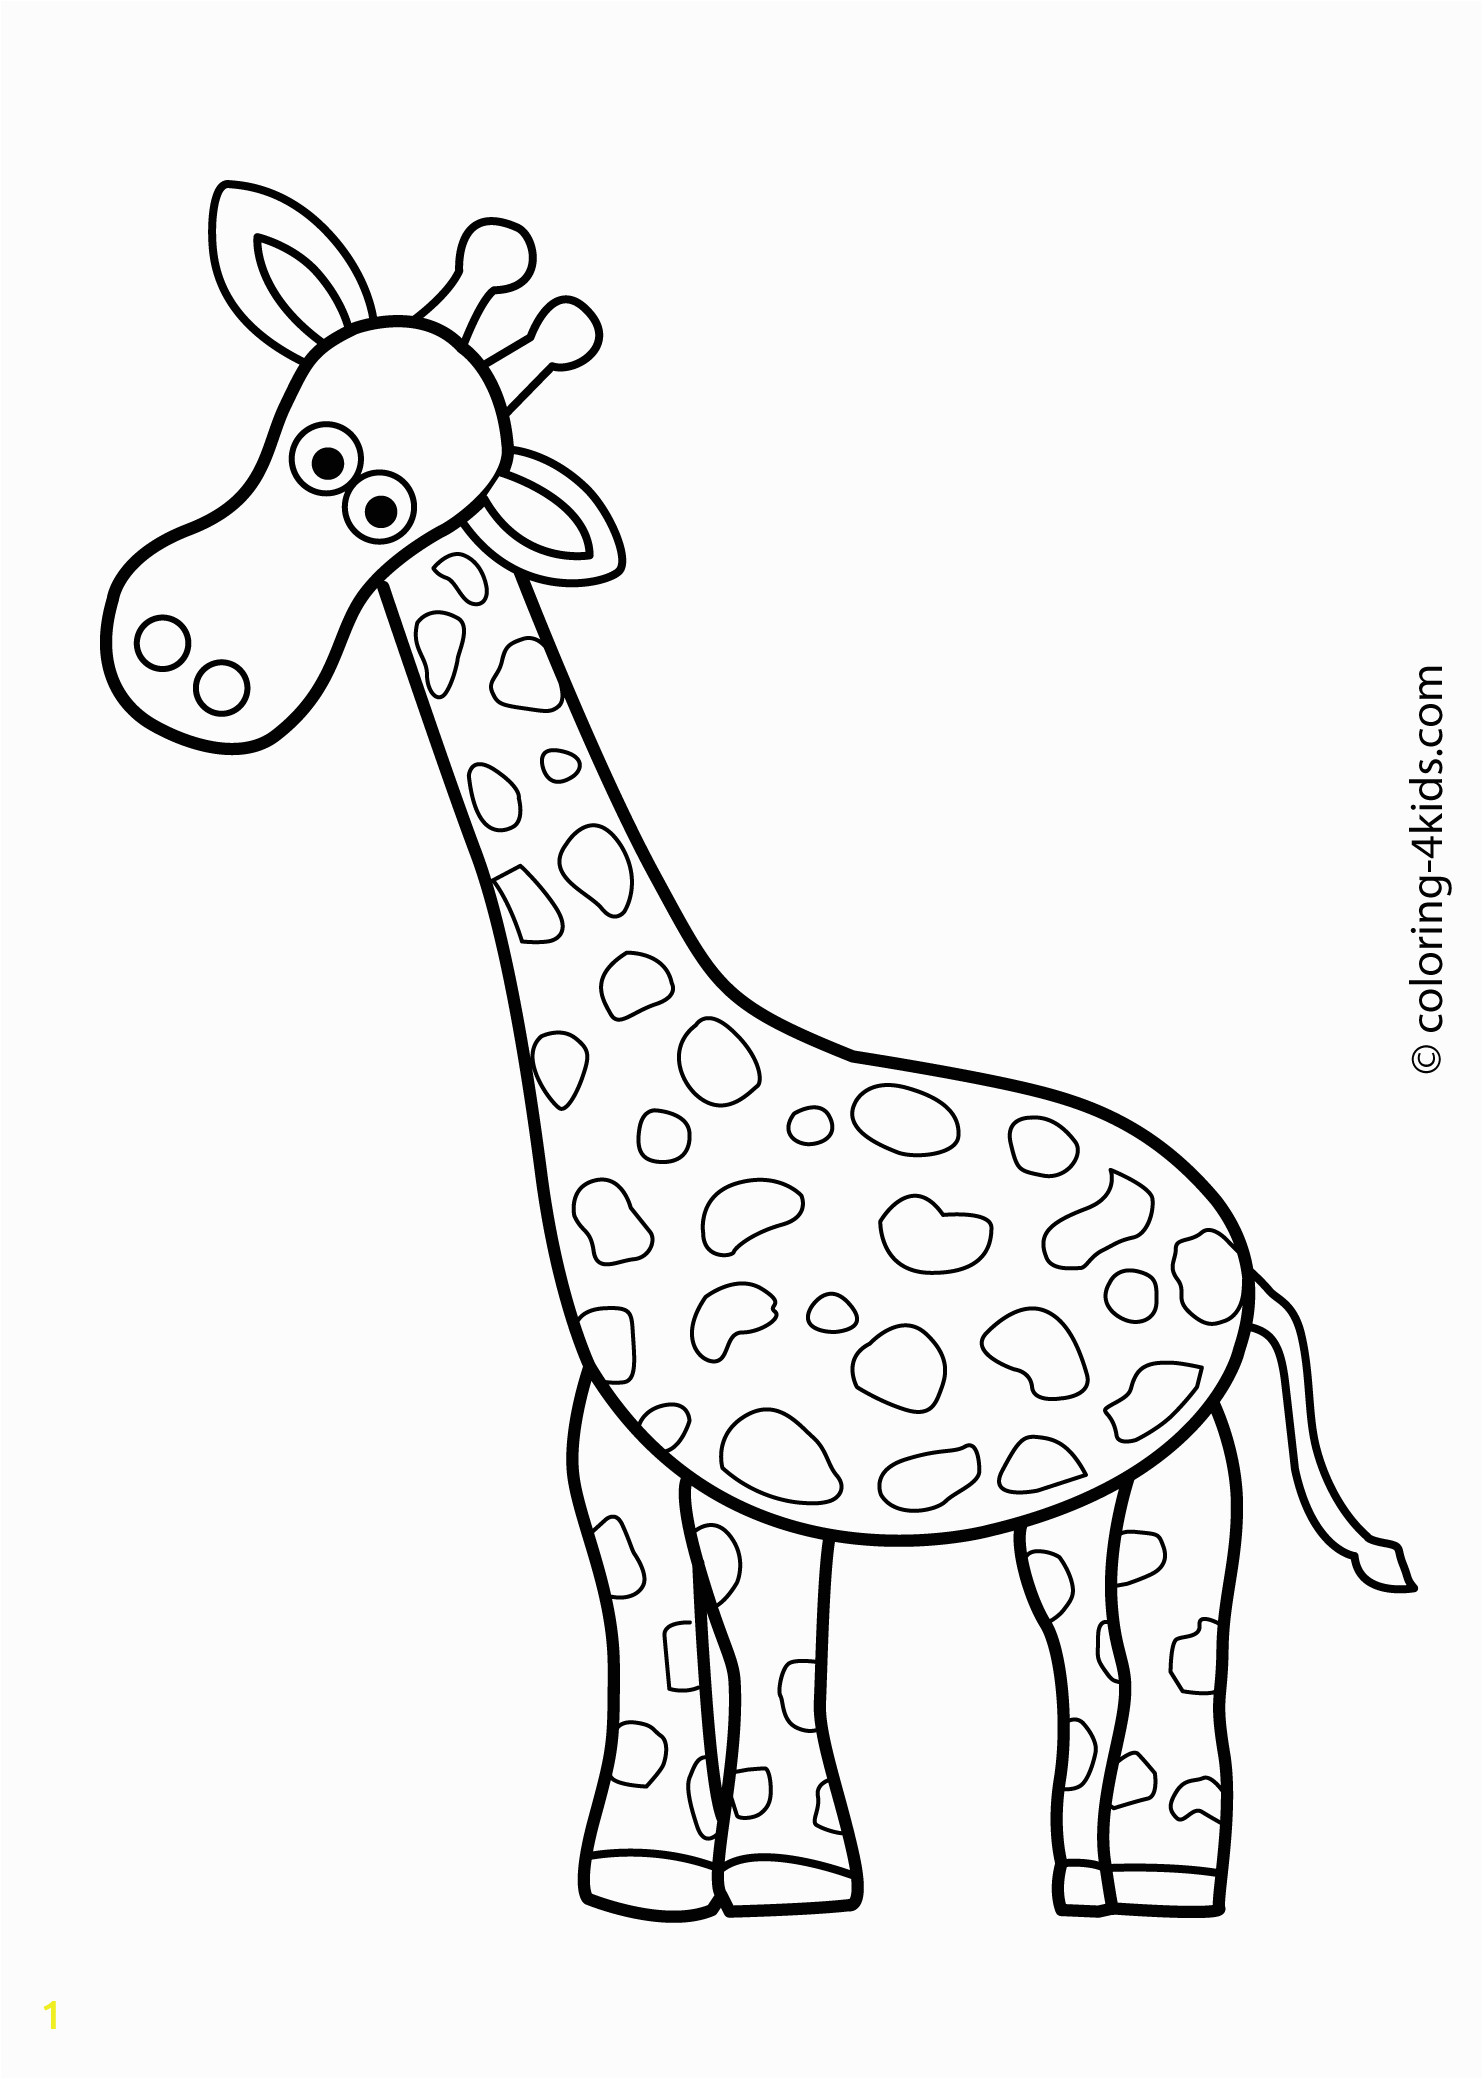 Download Zoo Animal Coloring Pages for Preschool | divyajanani.org